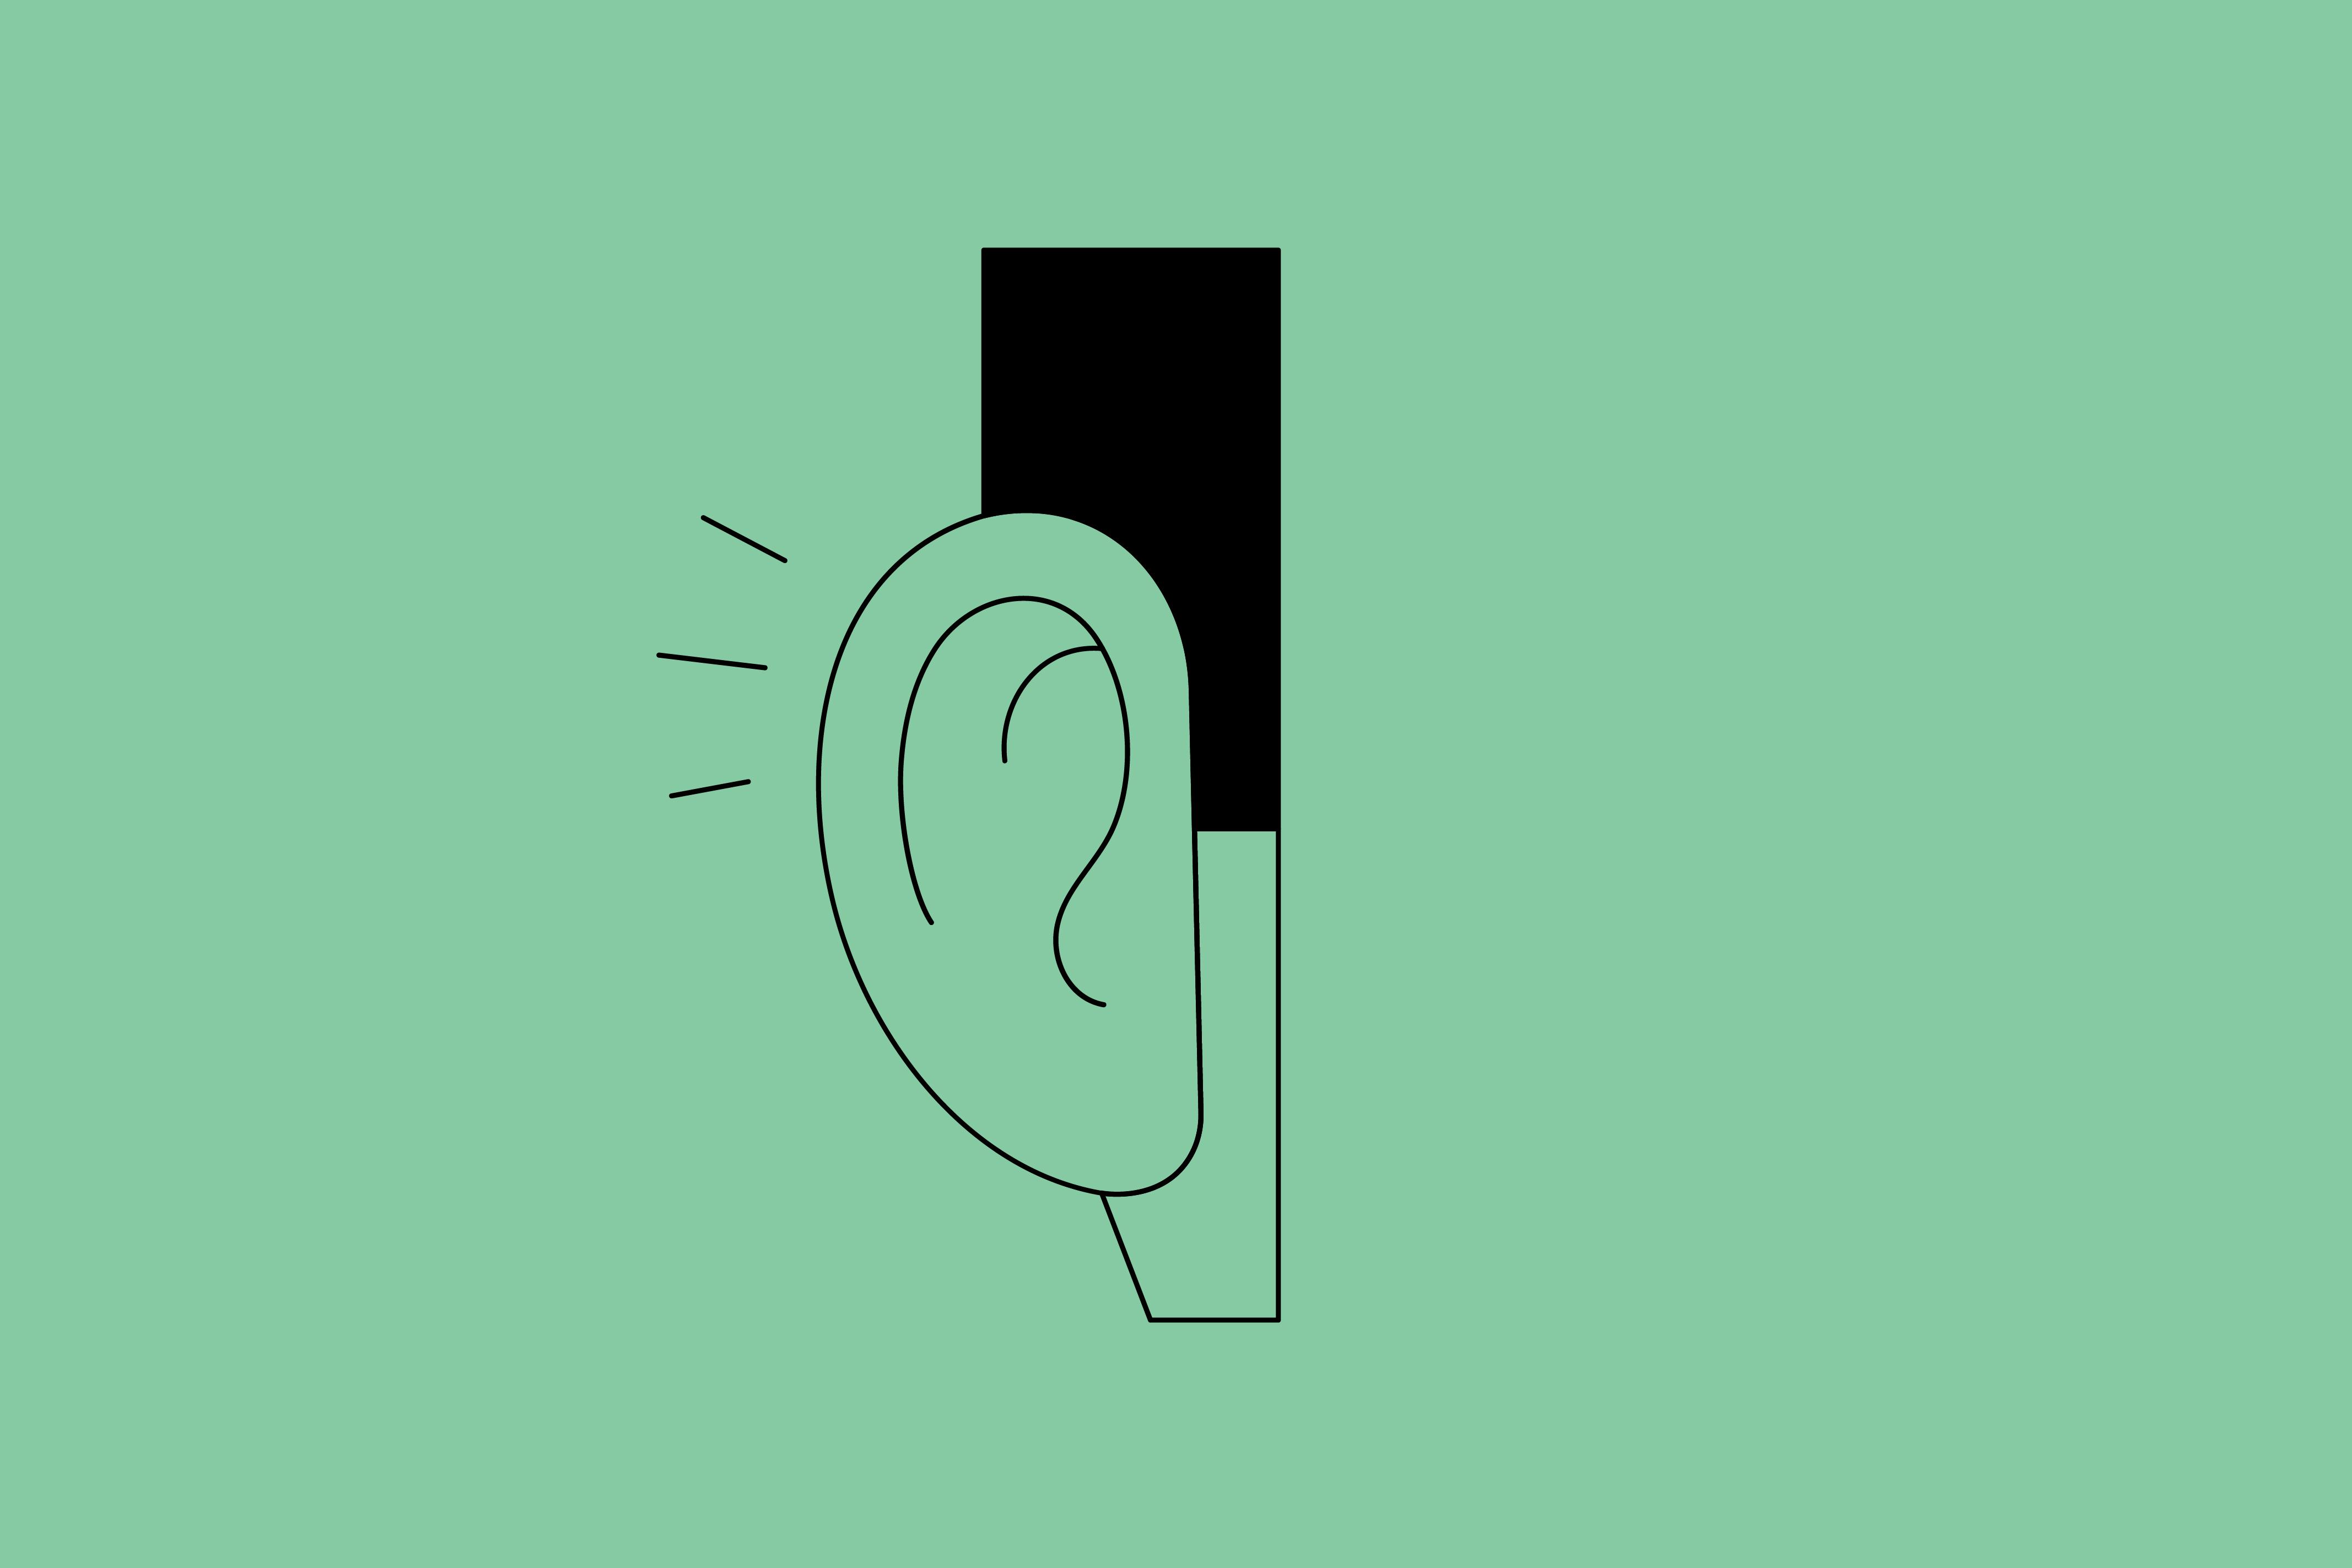 Against a mint green background is an illustration with black lines. Shown is an ear.